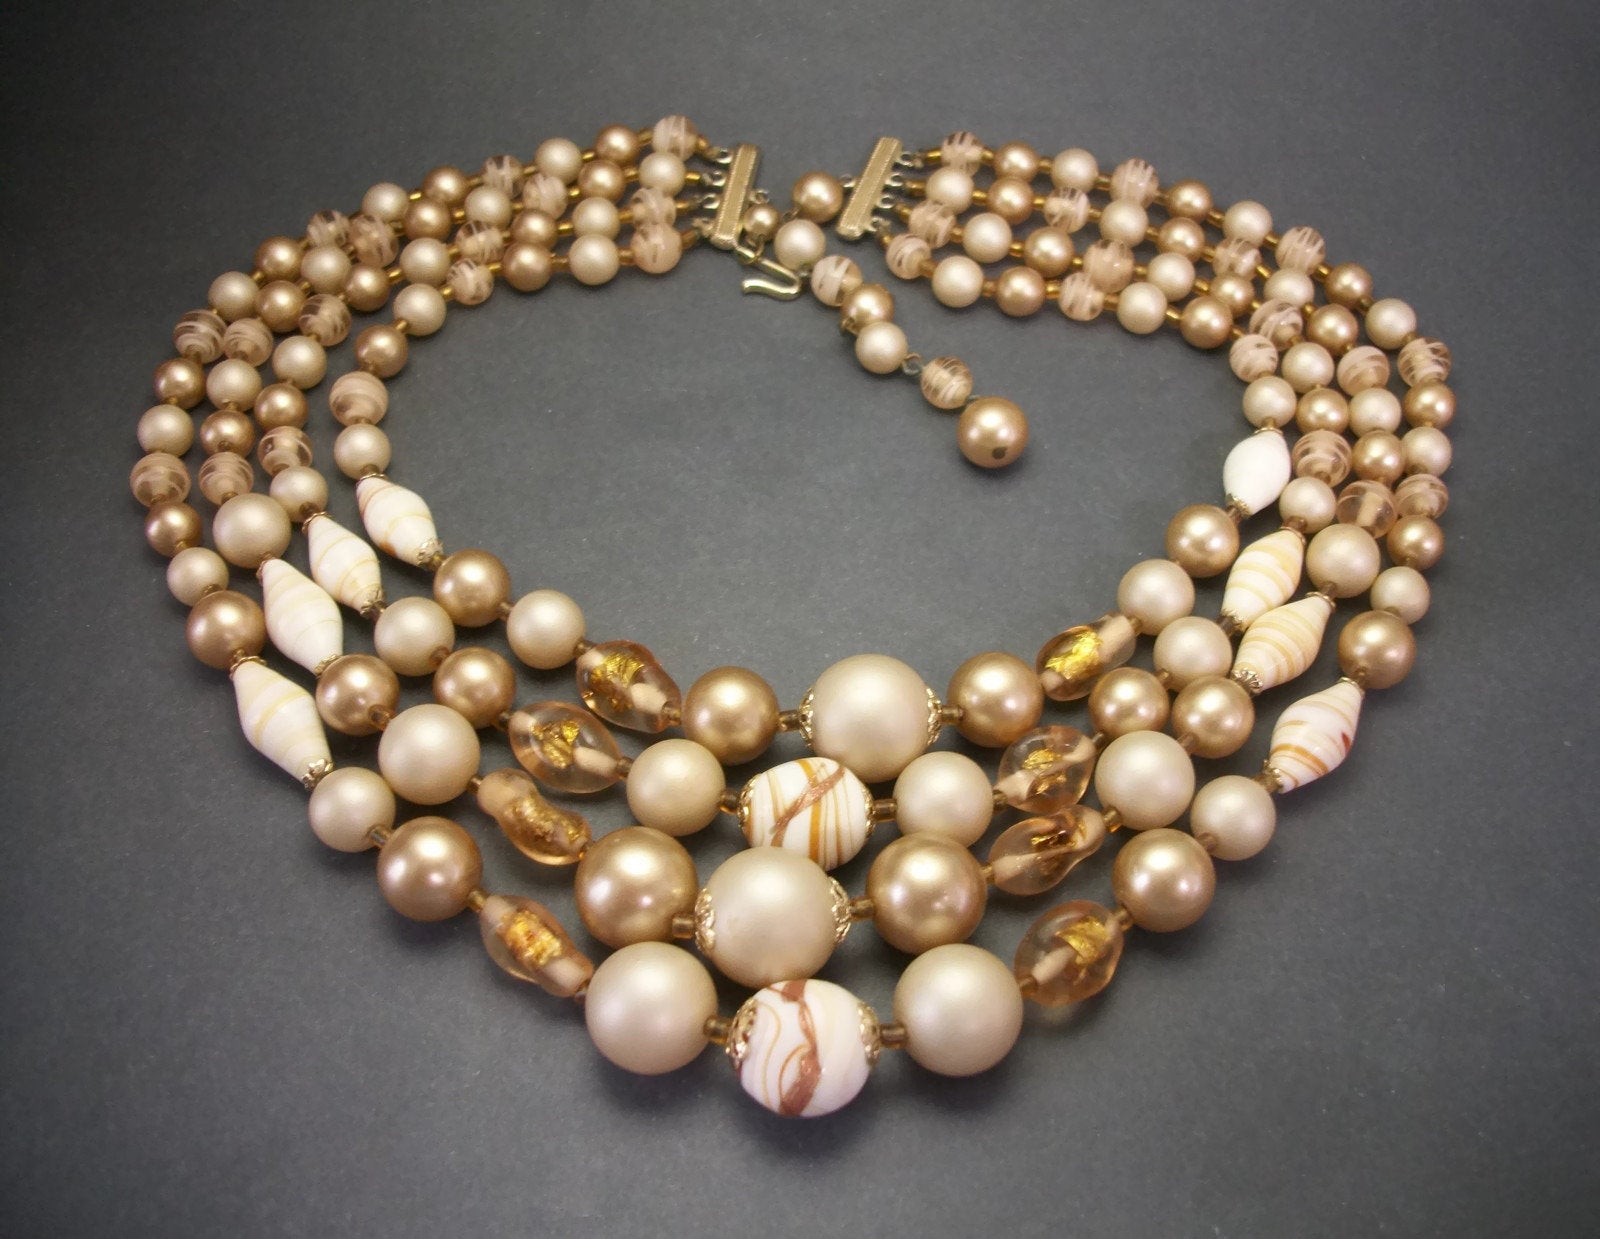 Are Old Pearl Necklaces Worth Anything? – Pearls for Men